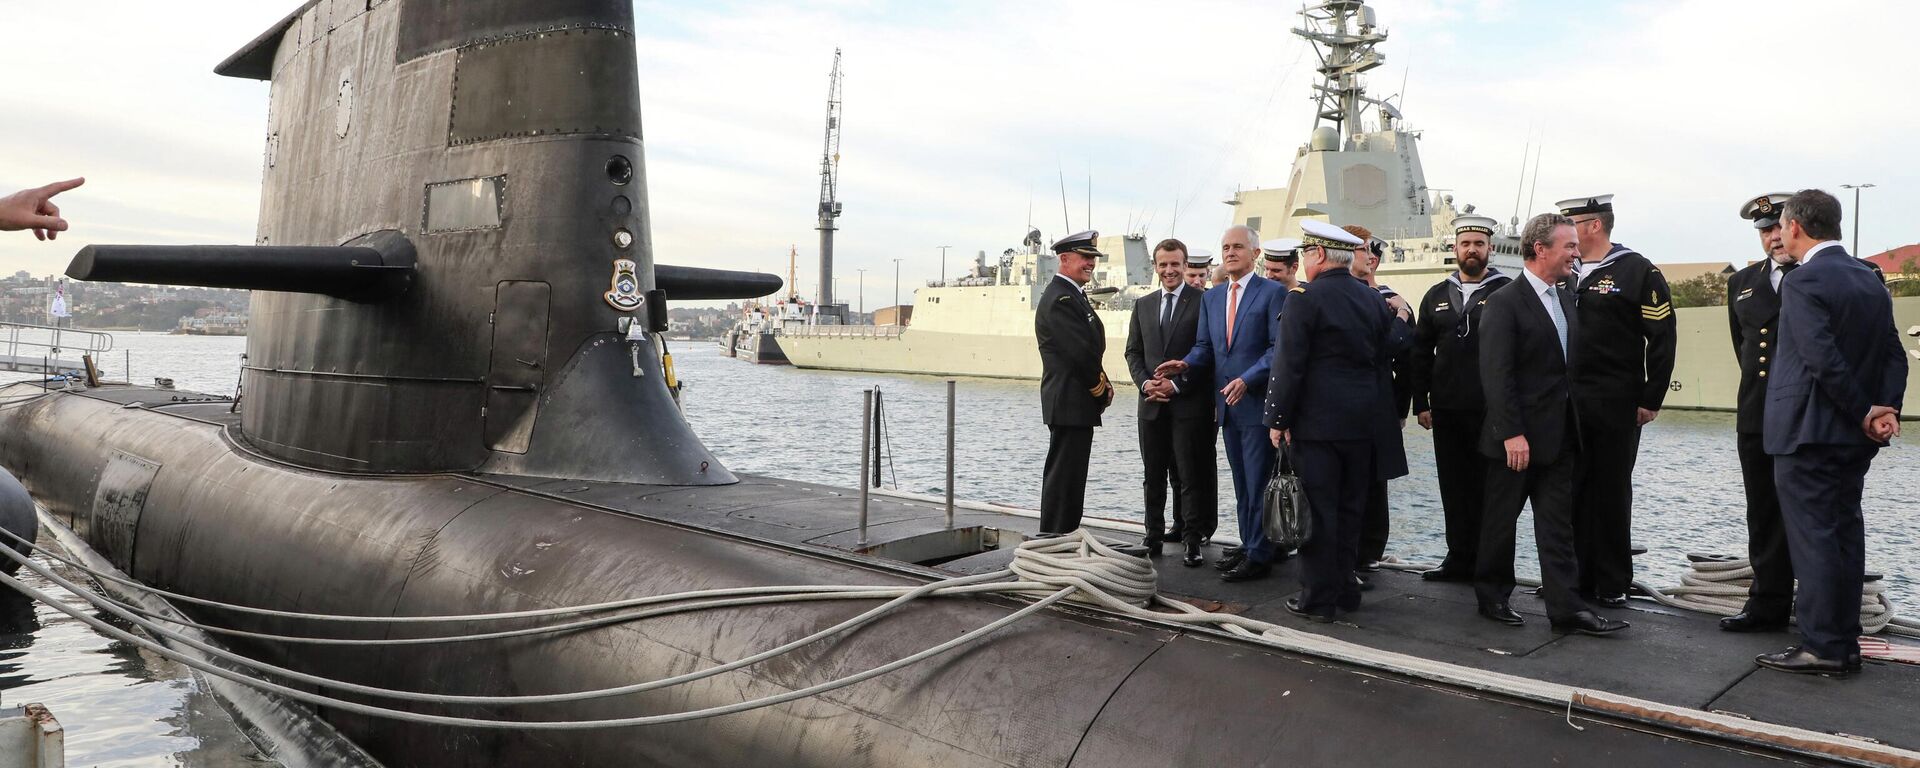 French President Emmanuel Macron (2nd L) and Australian Prime Minister Malcolm Turnbull (3rd L) stand on the deck of HMAS Waller, a Collins-class submarine operated by the Royal Australian Navy - Sputnik International, 1920, 27.10.2022